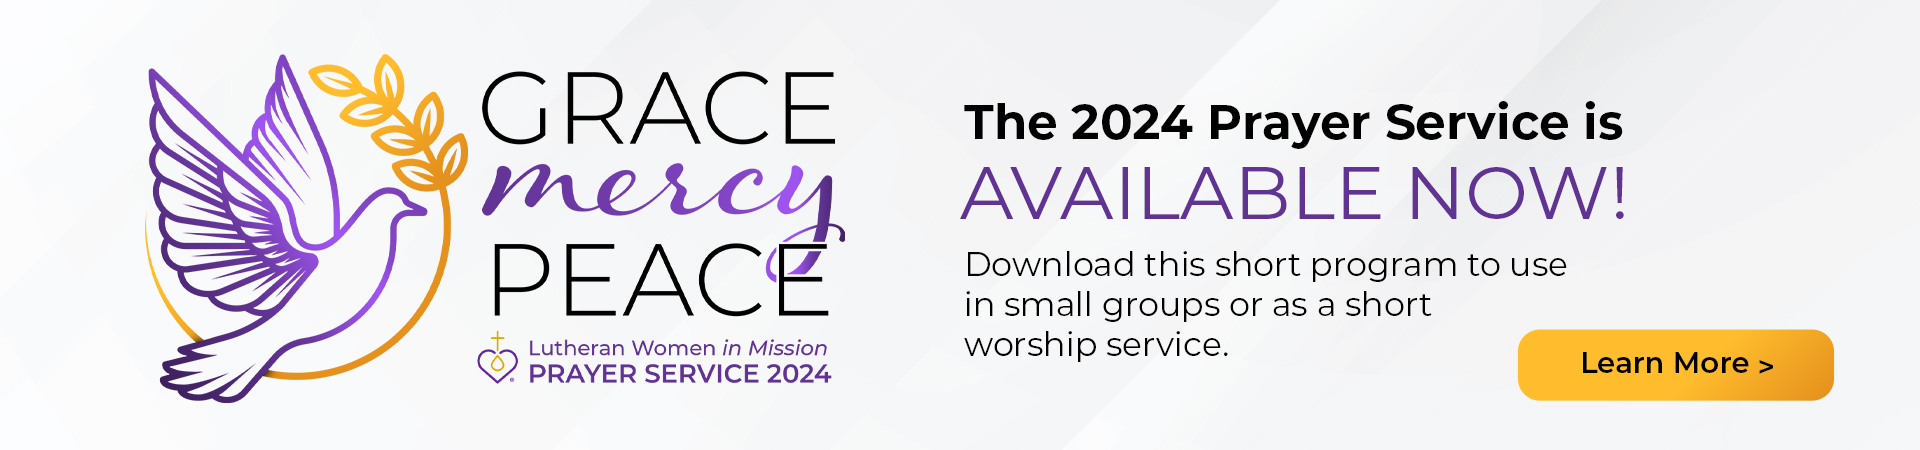 Grace. Mercy. Peace. The 2024 Prayer Service is available now! Download this short program to use in small groups or as a short worship service. Learn More.